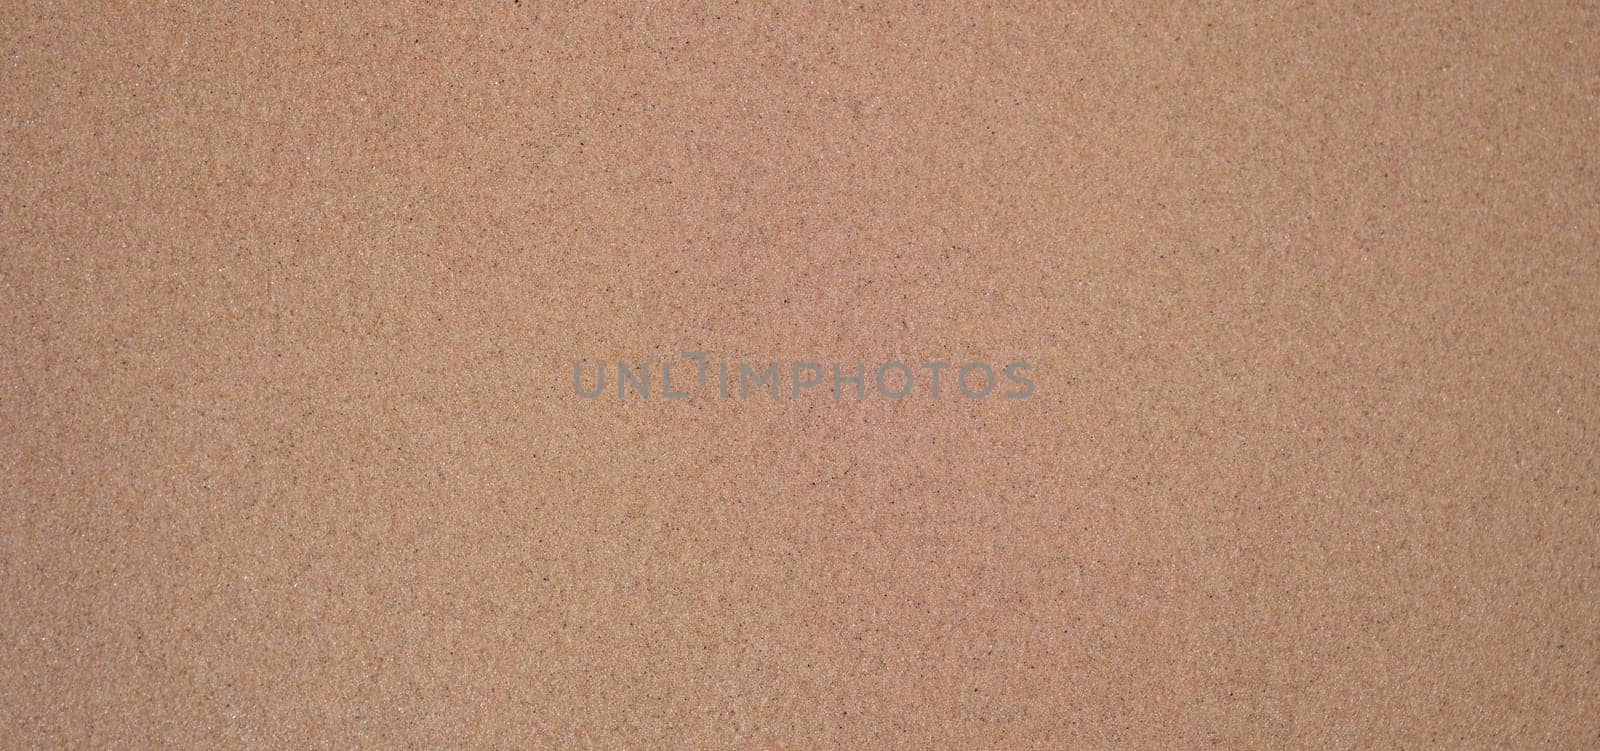 Brown paper texture background. Brown paper concept. Brown old paper texture cardboard sheet background